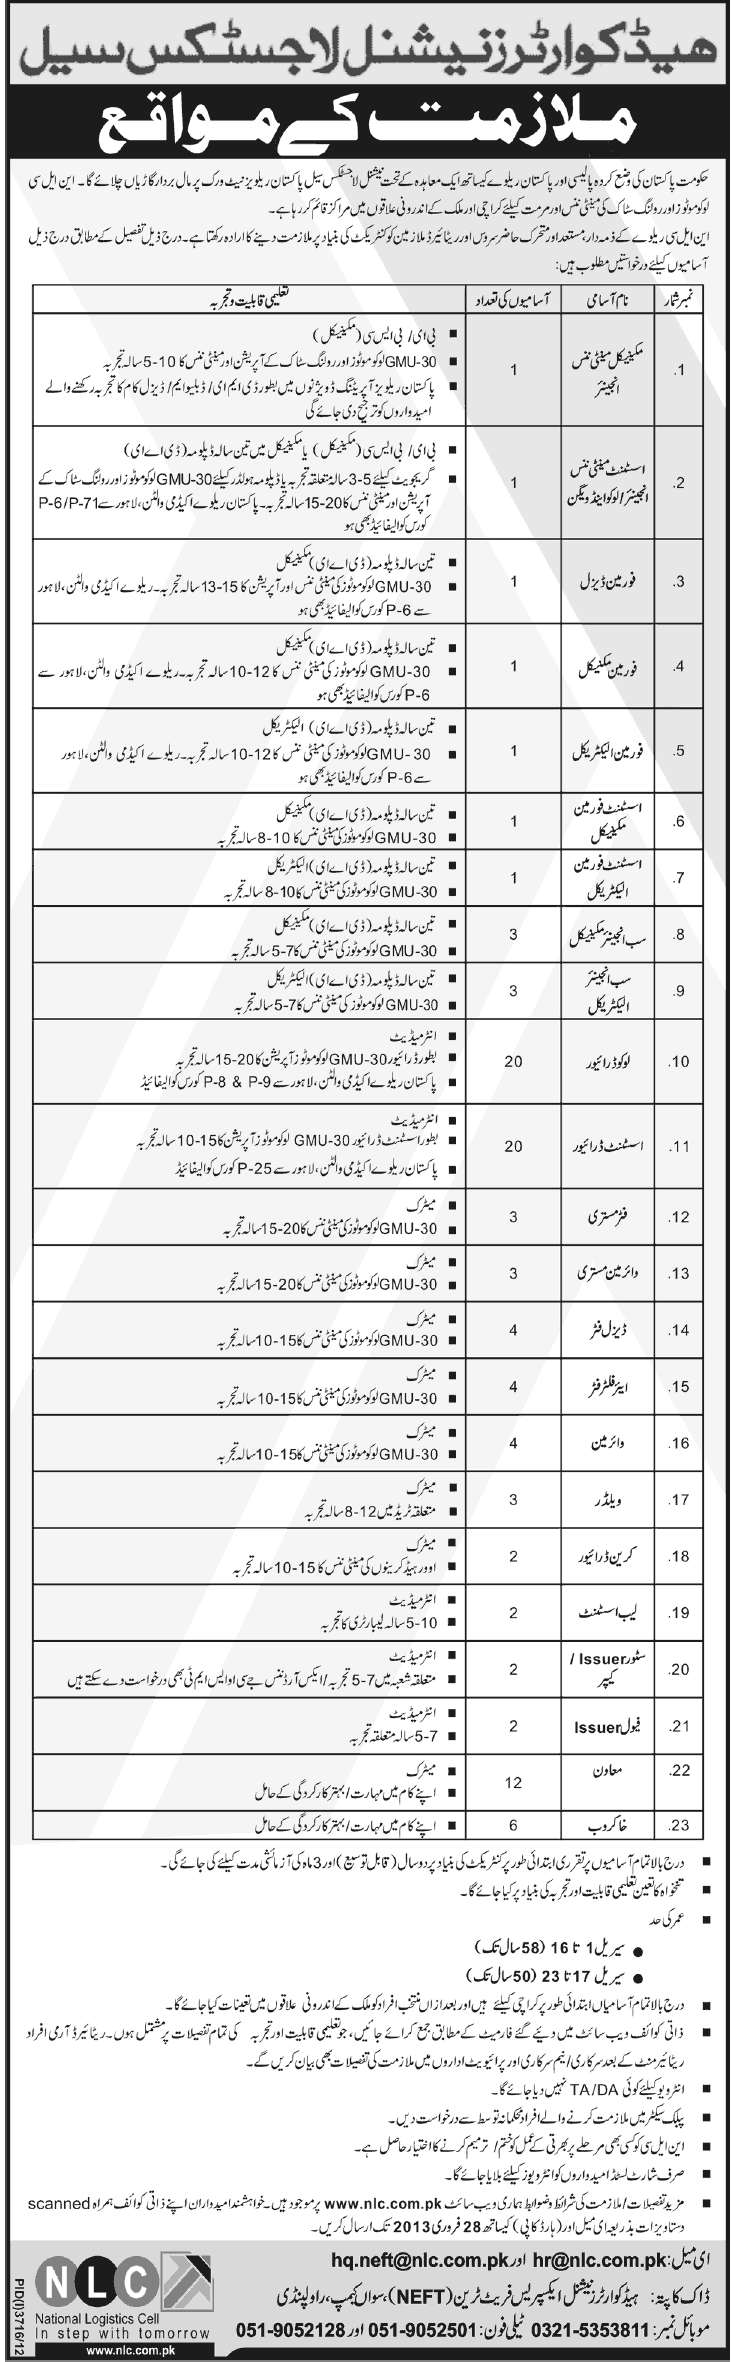 National Logistics Cell Jobs 2013 Pakistan Railway Employees (Retired / In Service)